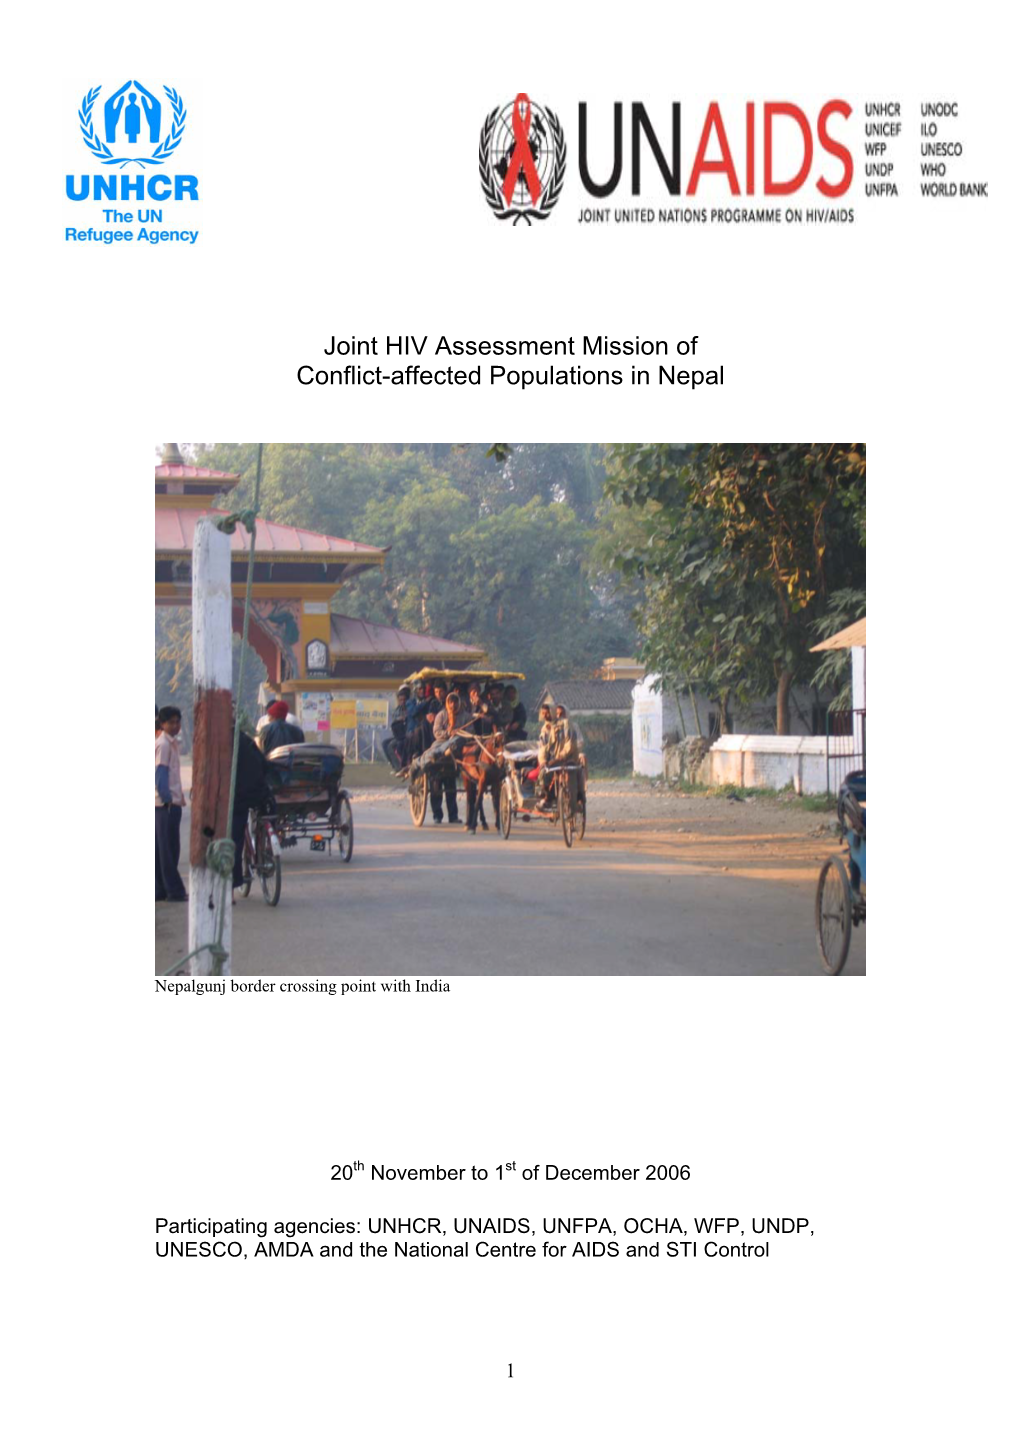 Jint HIV Assessment Mission of Conflict-Affected Popualtions in Nepal